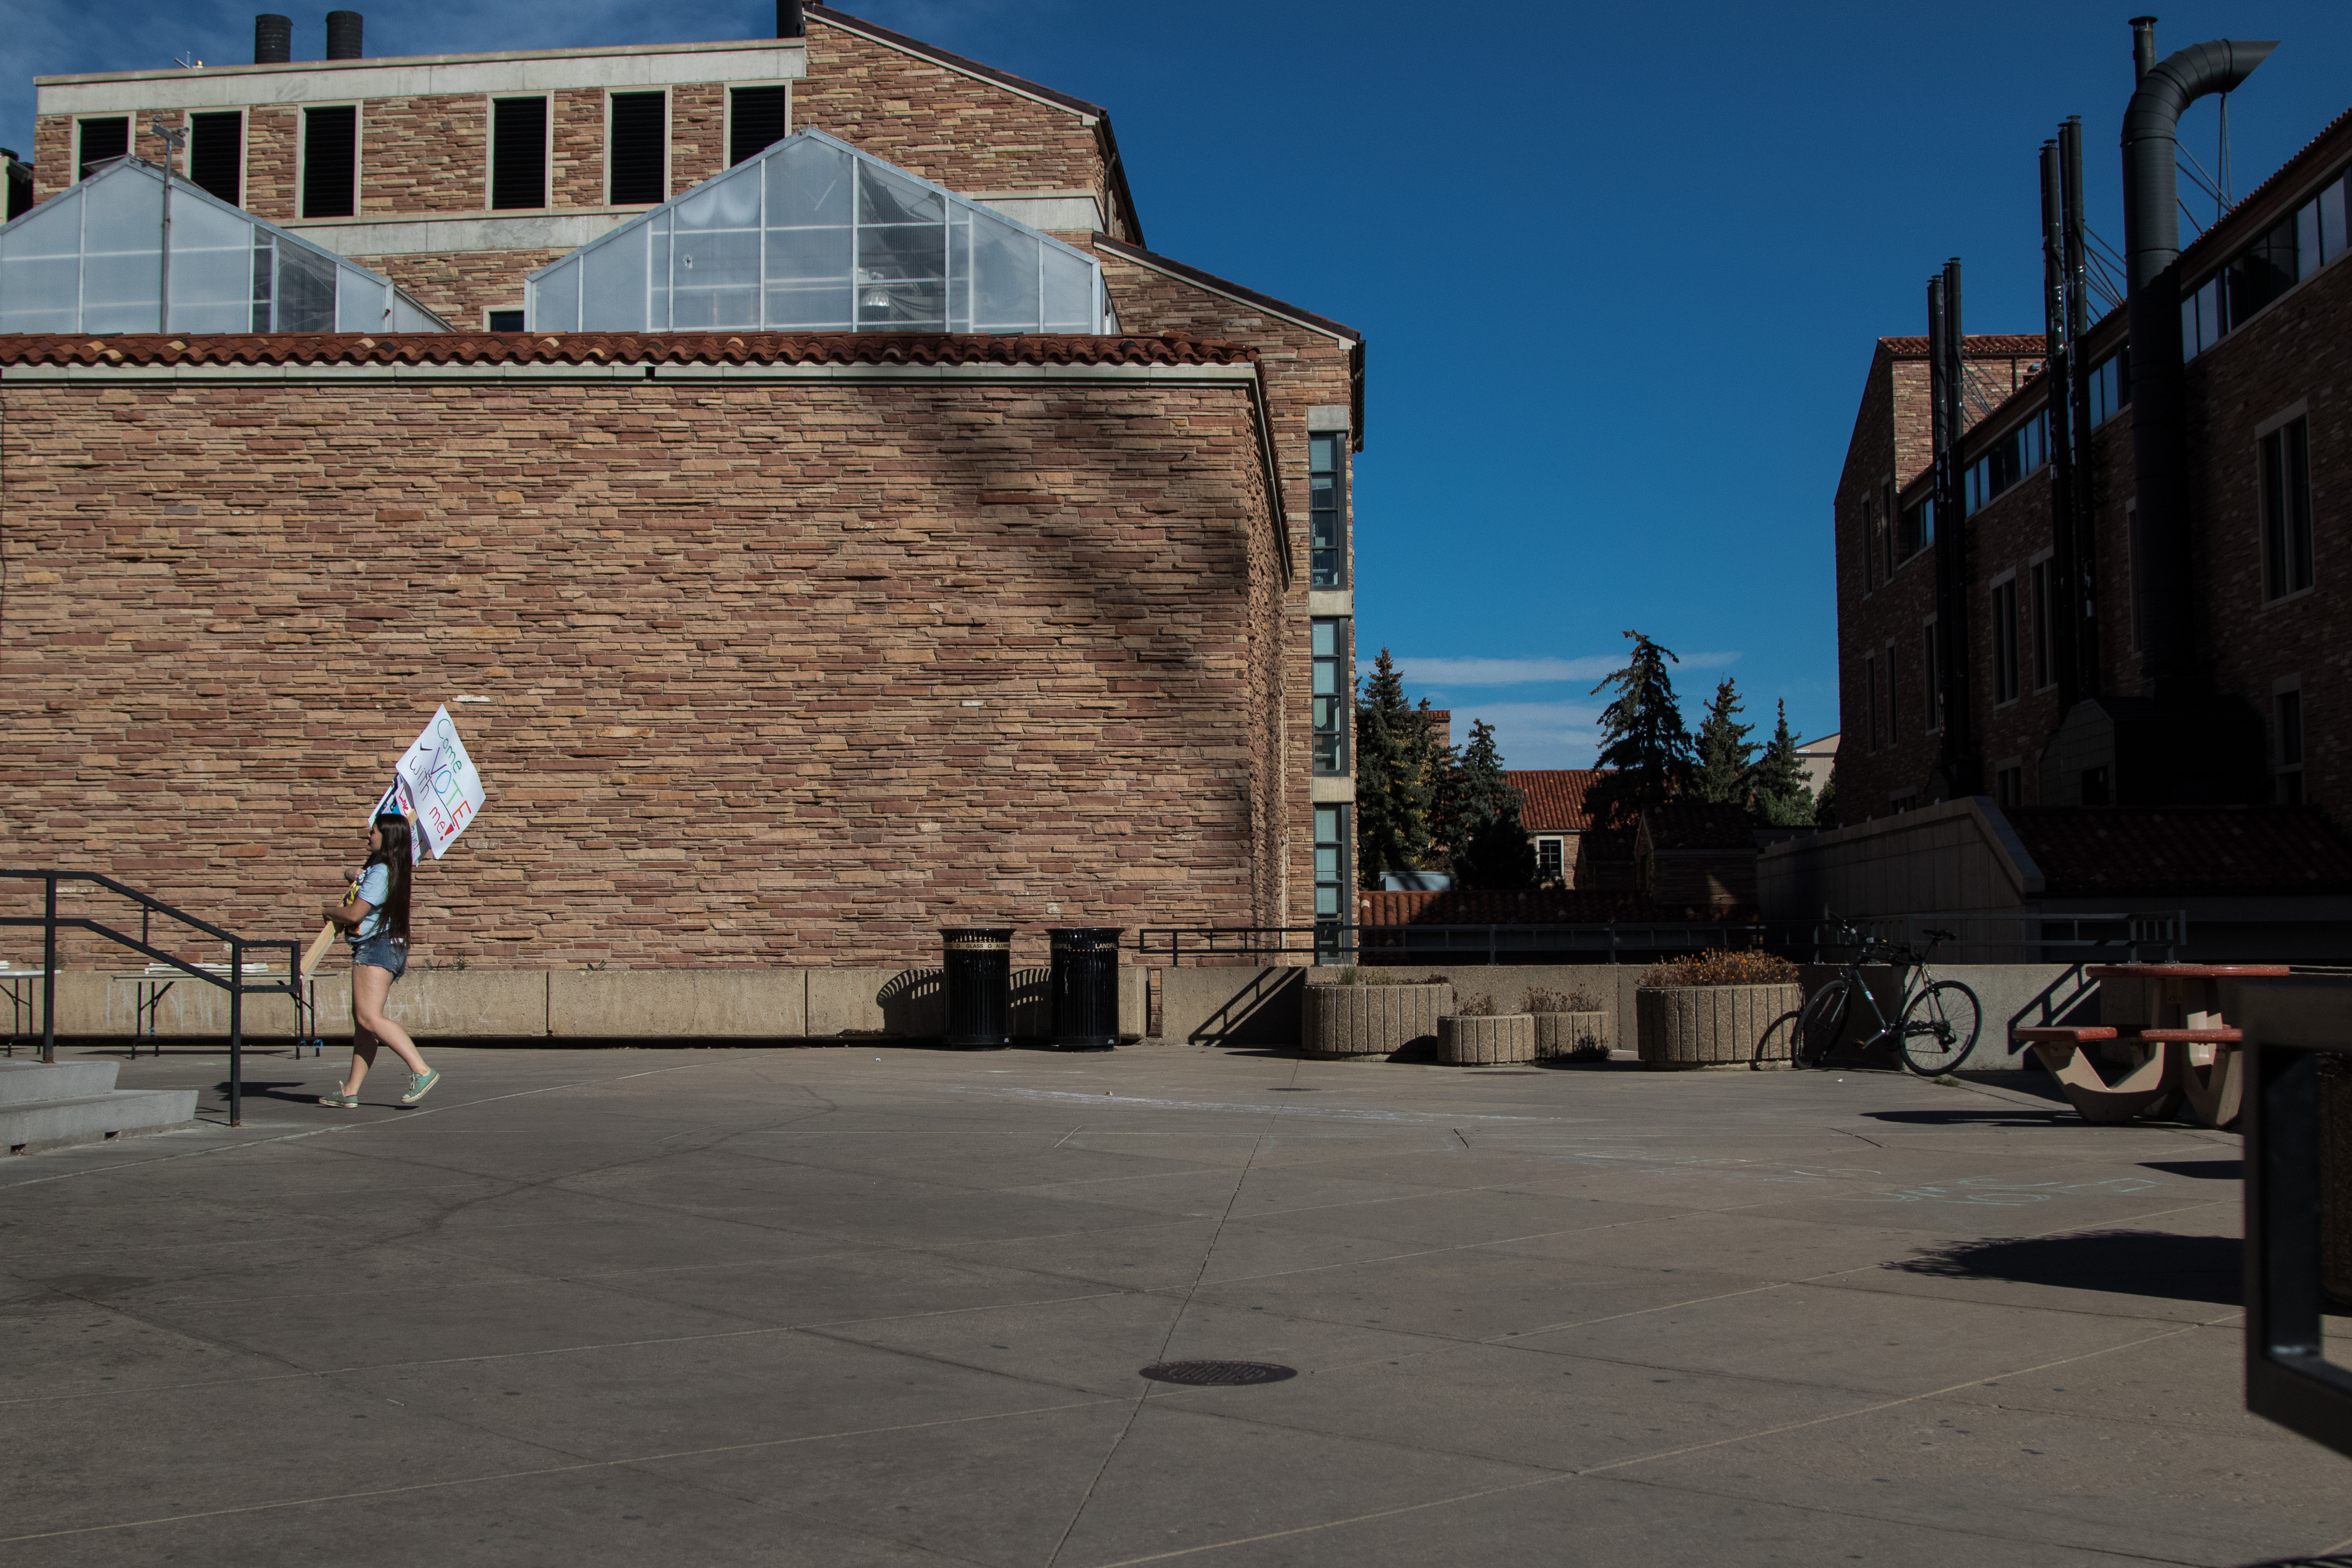 In a rare empty moment a Democratic supporter carries voting signs to the UMC fountain area. (Jackson Barnett/CU Independent)